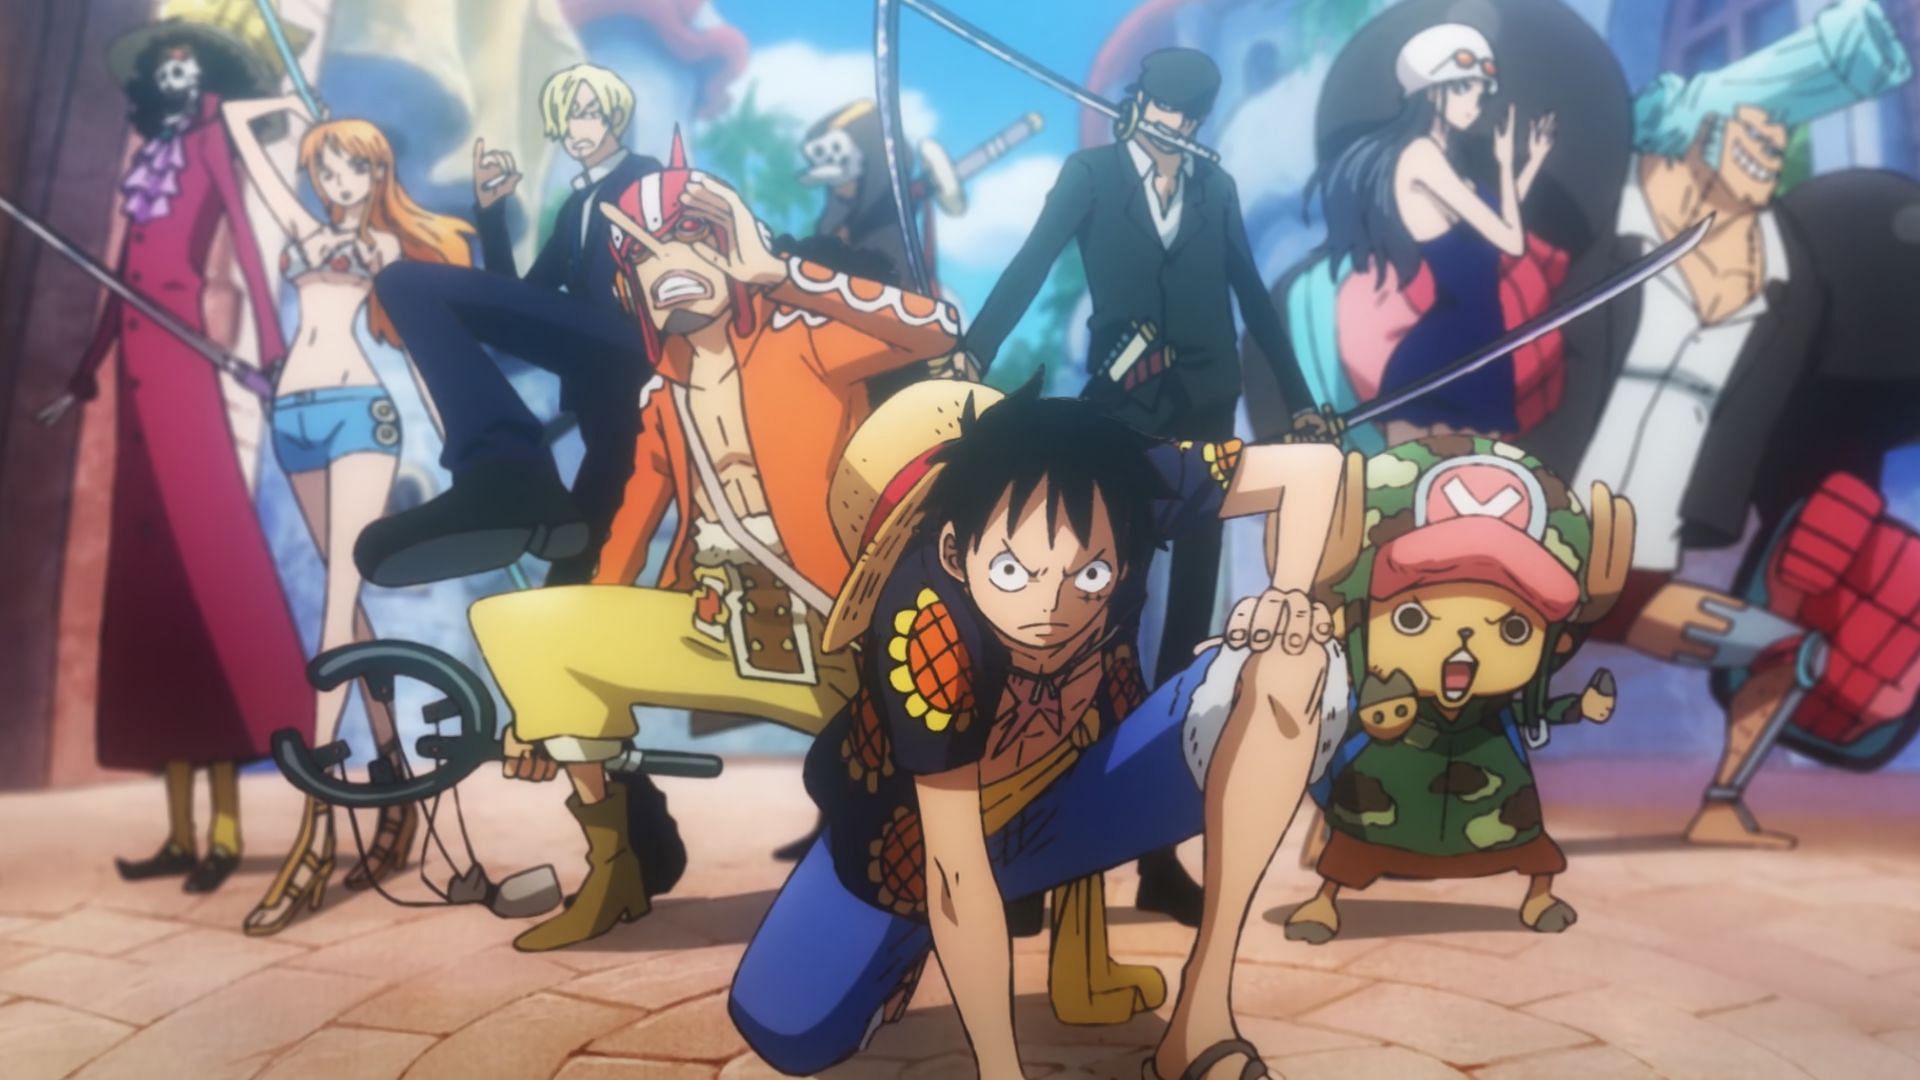 Beloved One Piece director Megumi Ishitani set to direct Episode 1015,  adaptation of 1,000th chapter